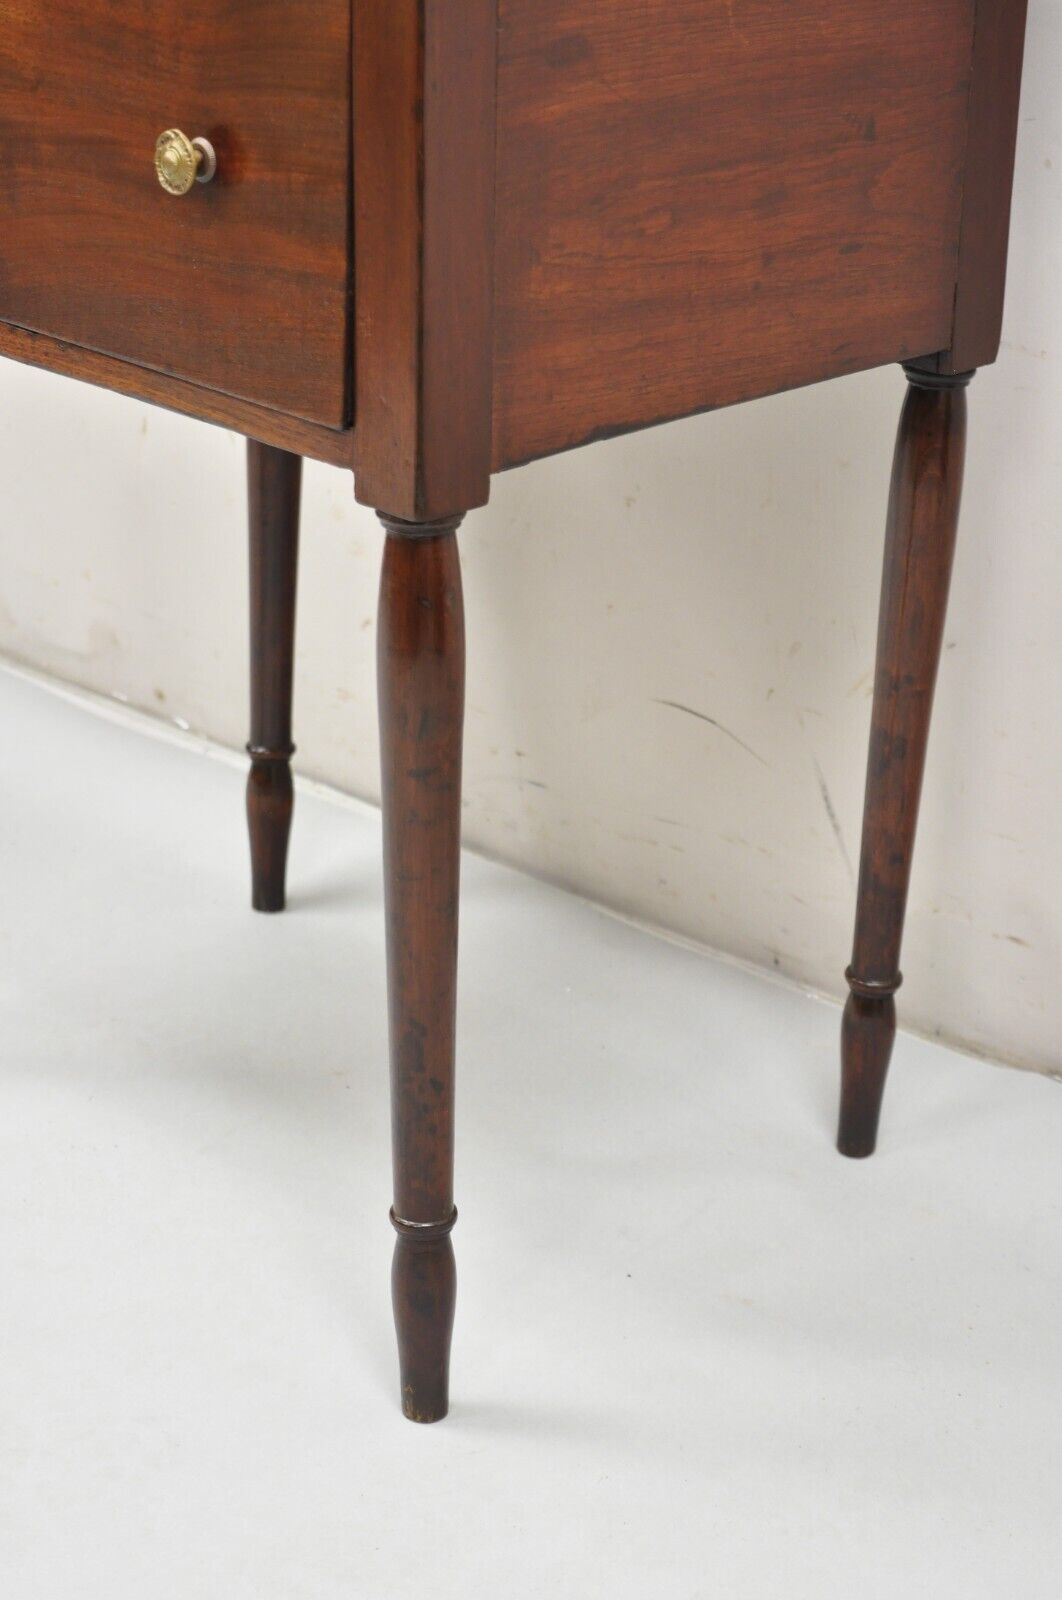 Antique Federal Sheraton Mahogany 2 Drawer Work Stand Side Table Nightstand